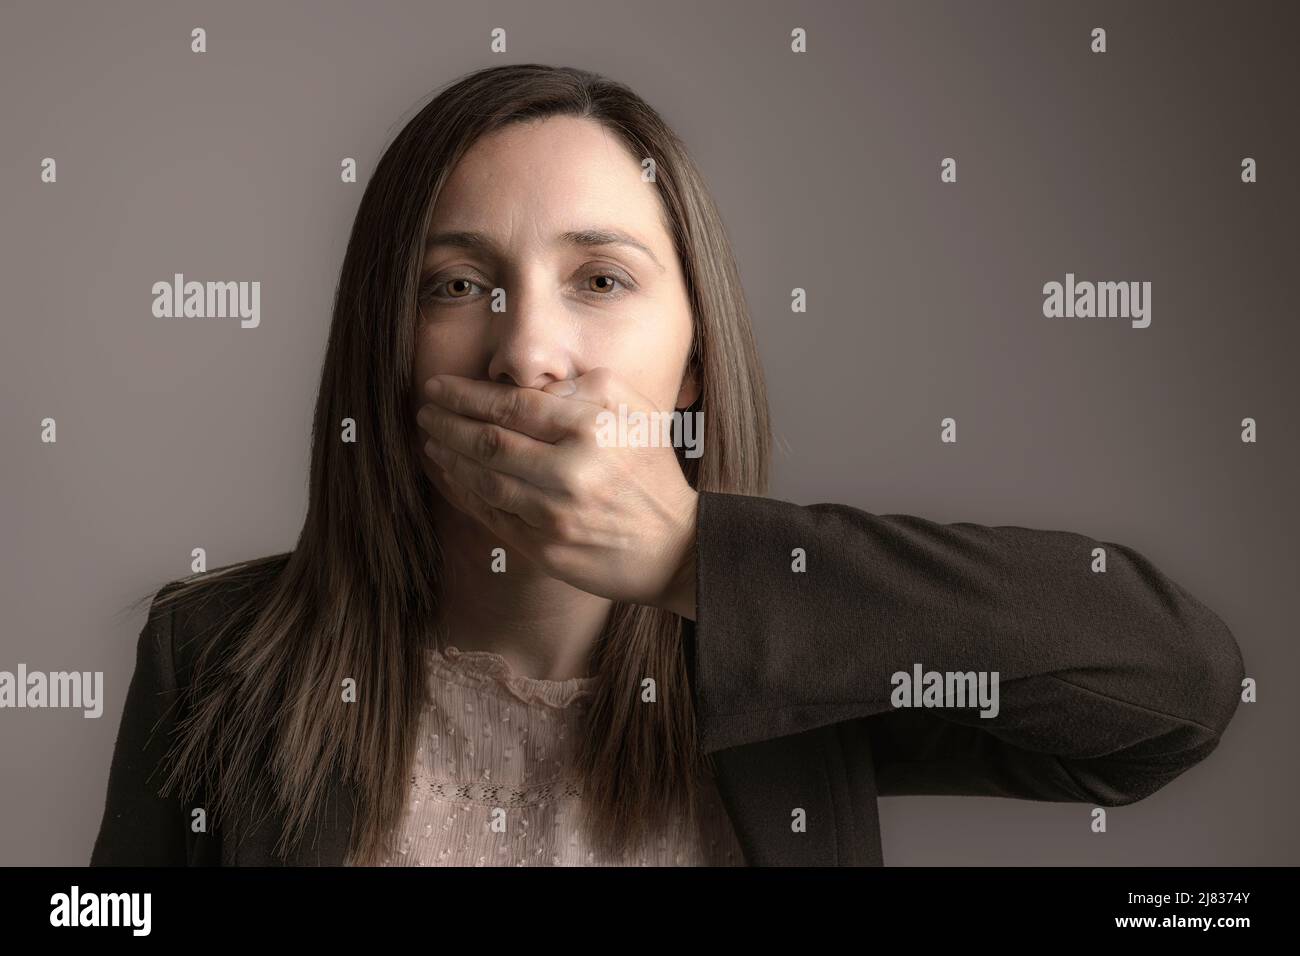 portrait of a woman covering her mouth with one hand. Stock Photo